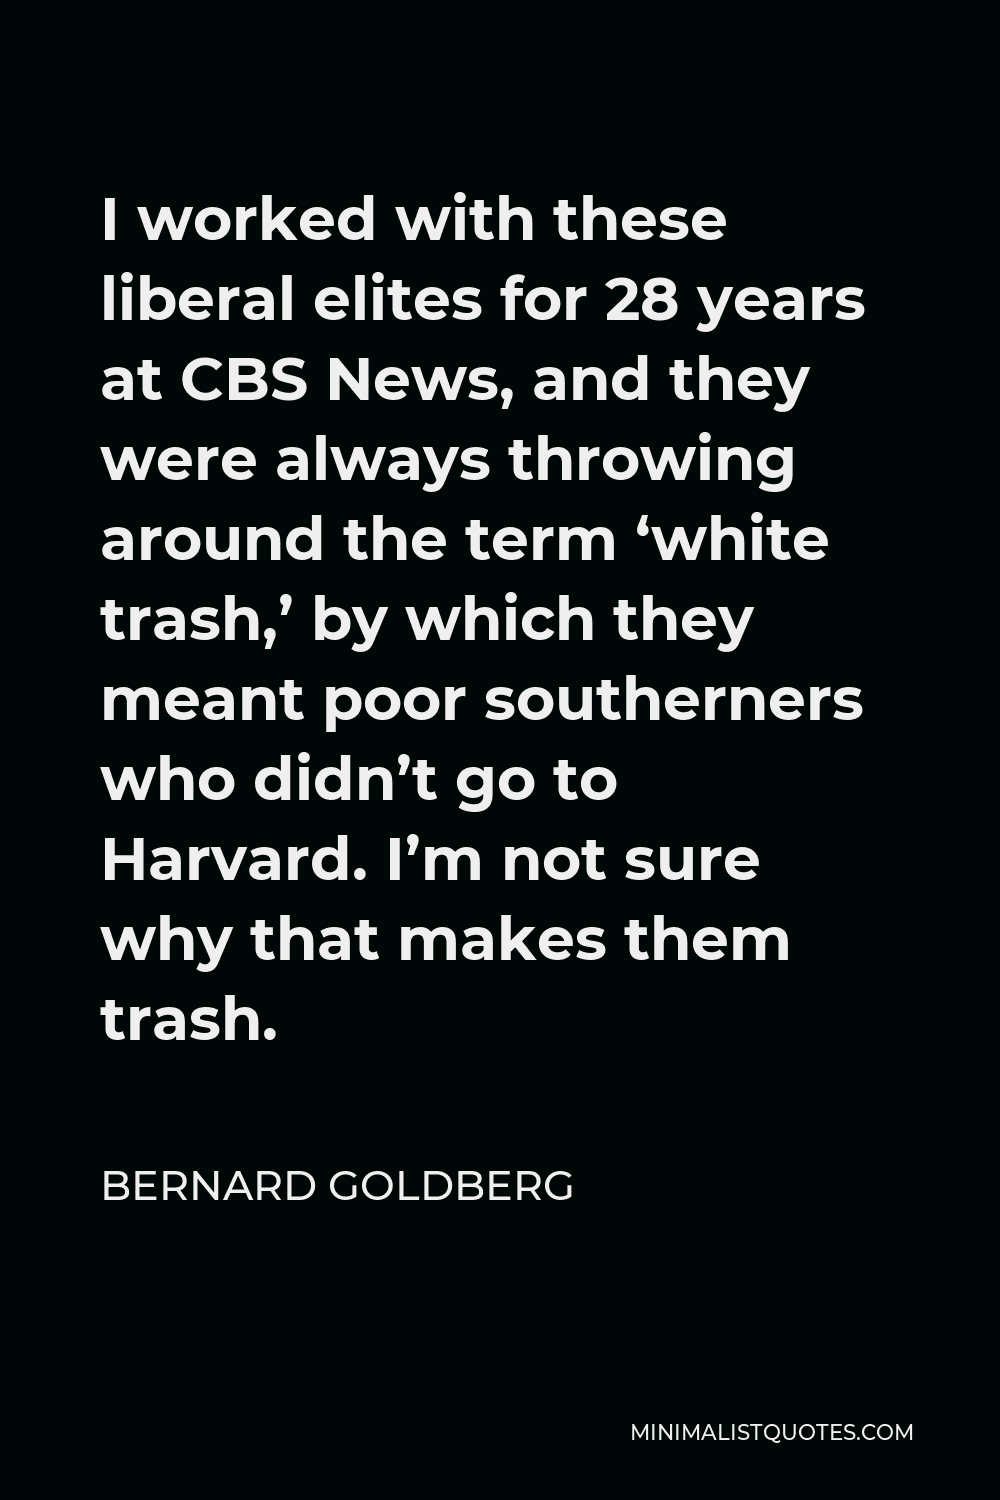 Bernard Goldberg Quote - I worked with these liberal elites for 28 years at CBS News, and they were always throwing around the term ‘white trash,’ by which they meant poor southerners who didn’t go to Harvard. I’m not sure why that makes them trash.